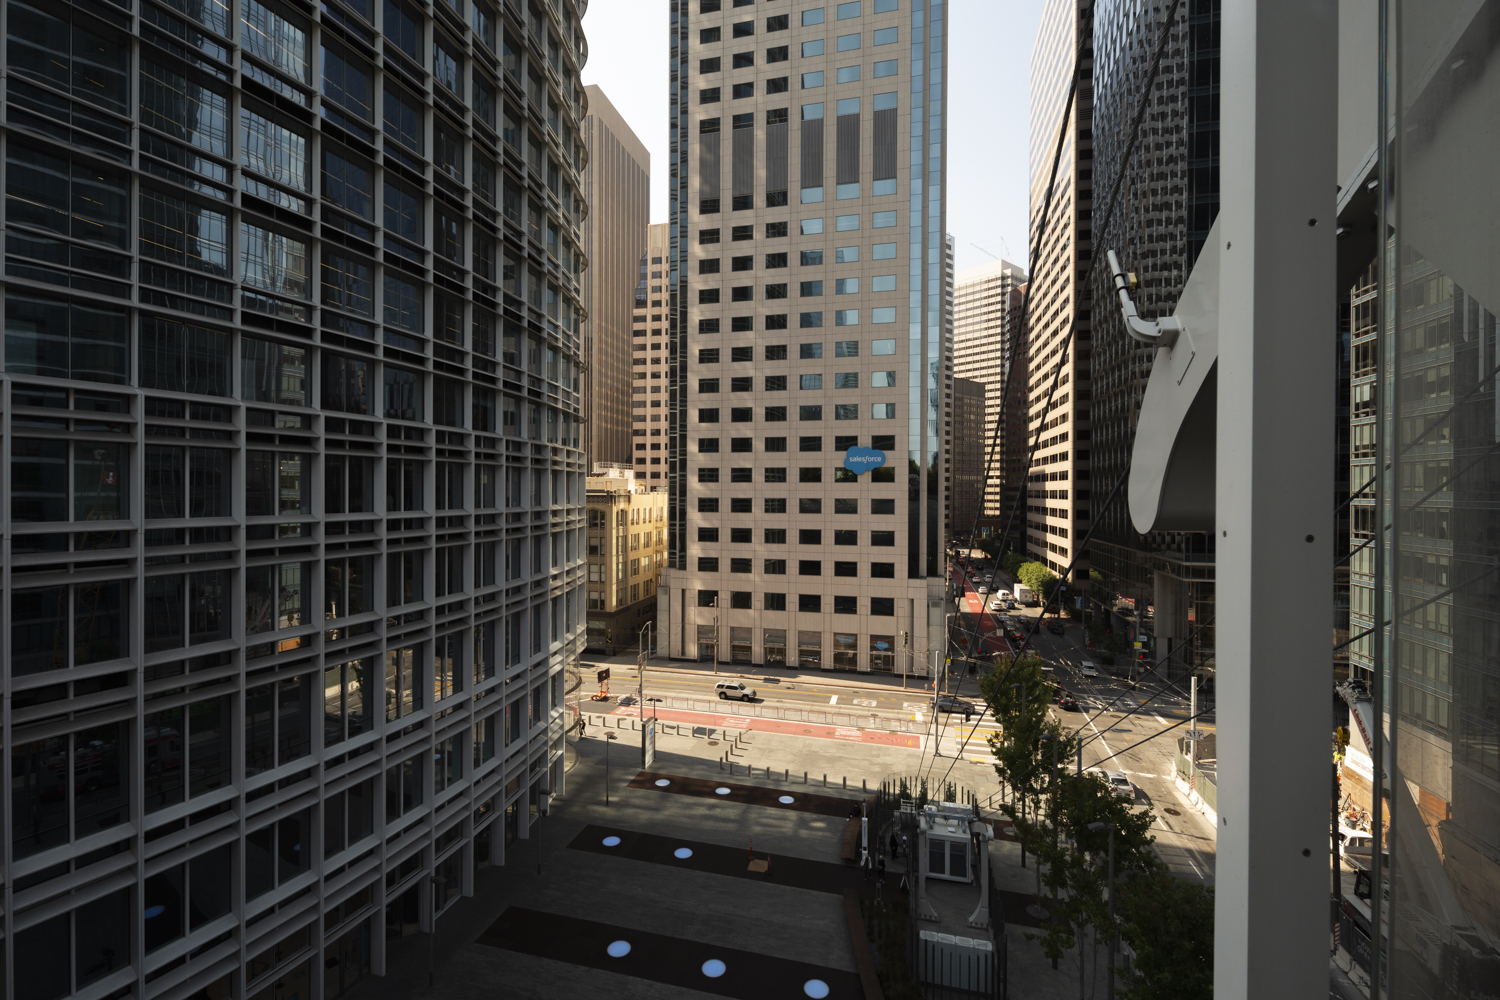 Salesforce West at 50 Fremont Street seen from Salesforce park, image by Andrew Campbell Nelson